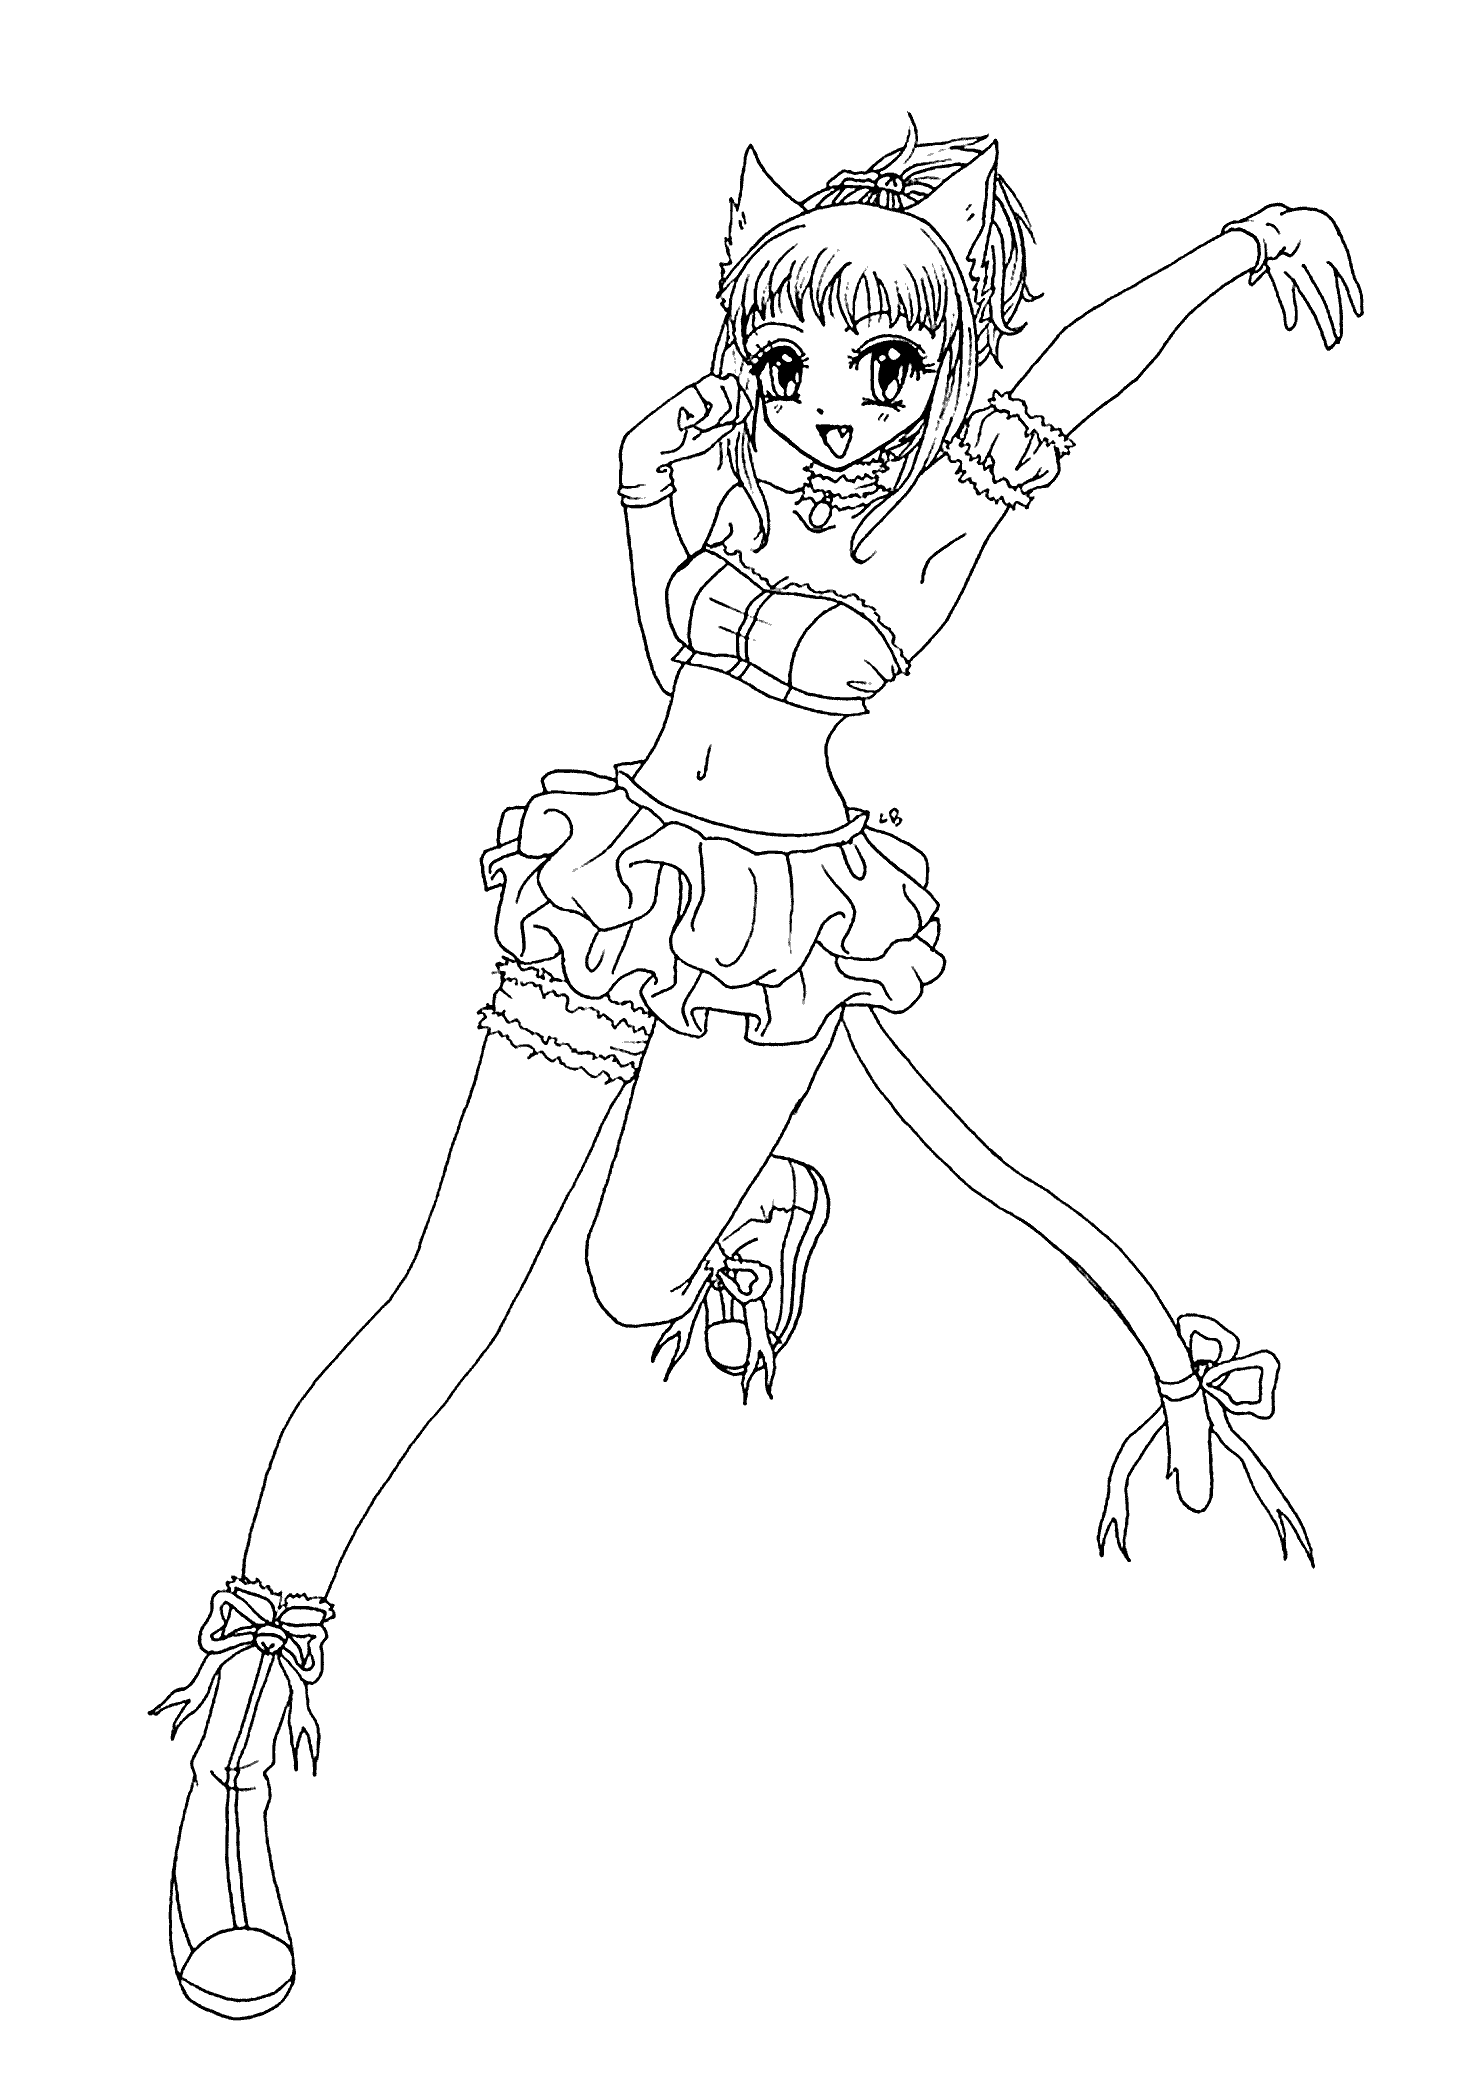 Free Anime Cat Girl Coloring Pages, Download Free Anime Cat Girl ...